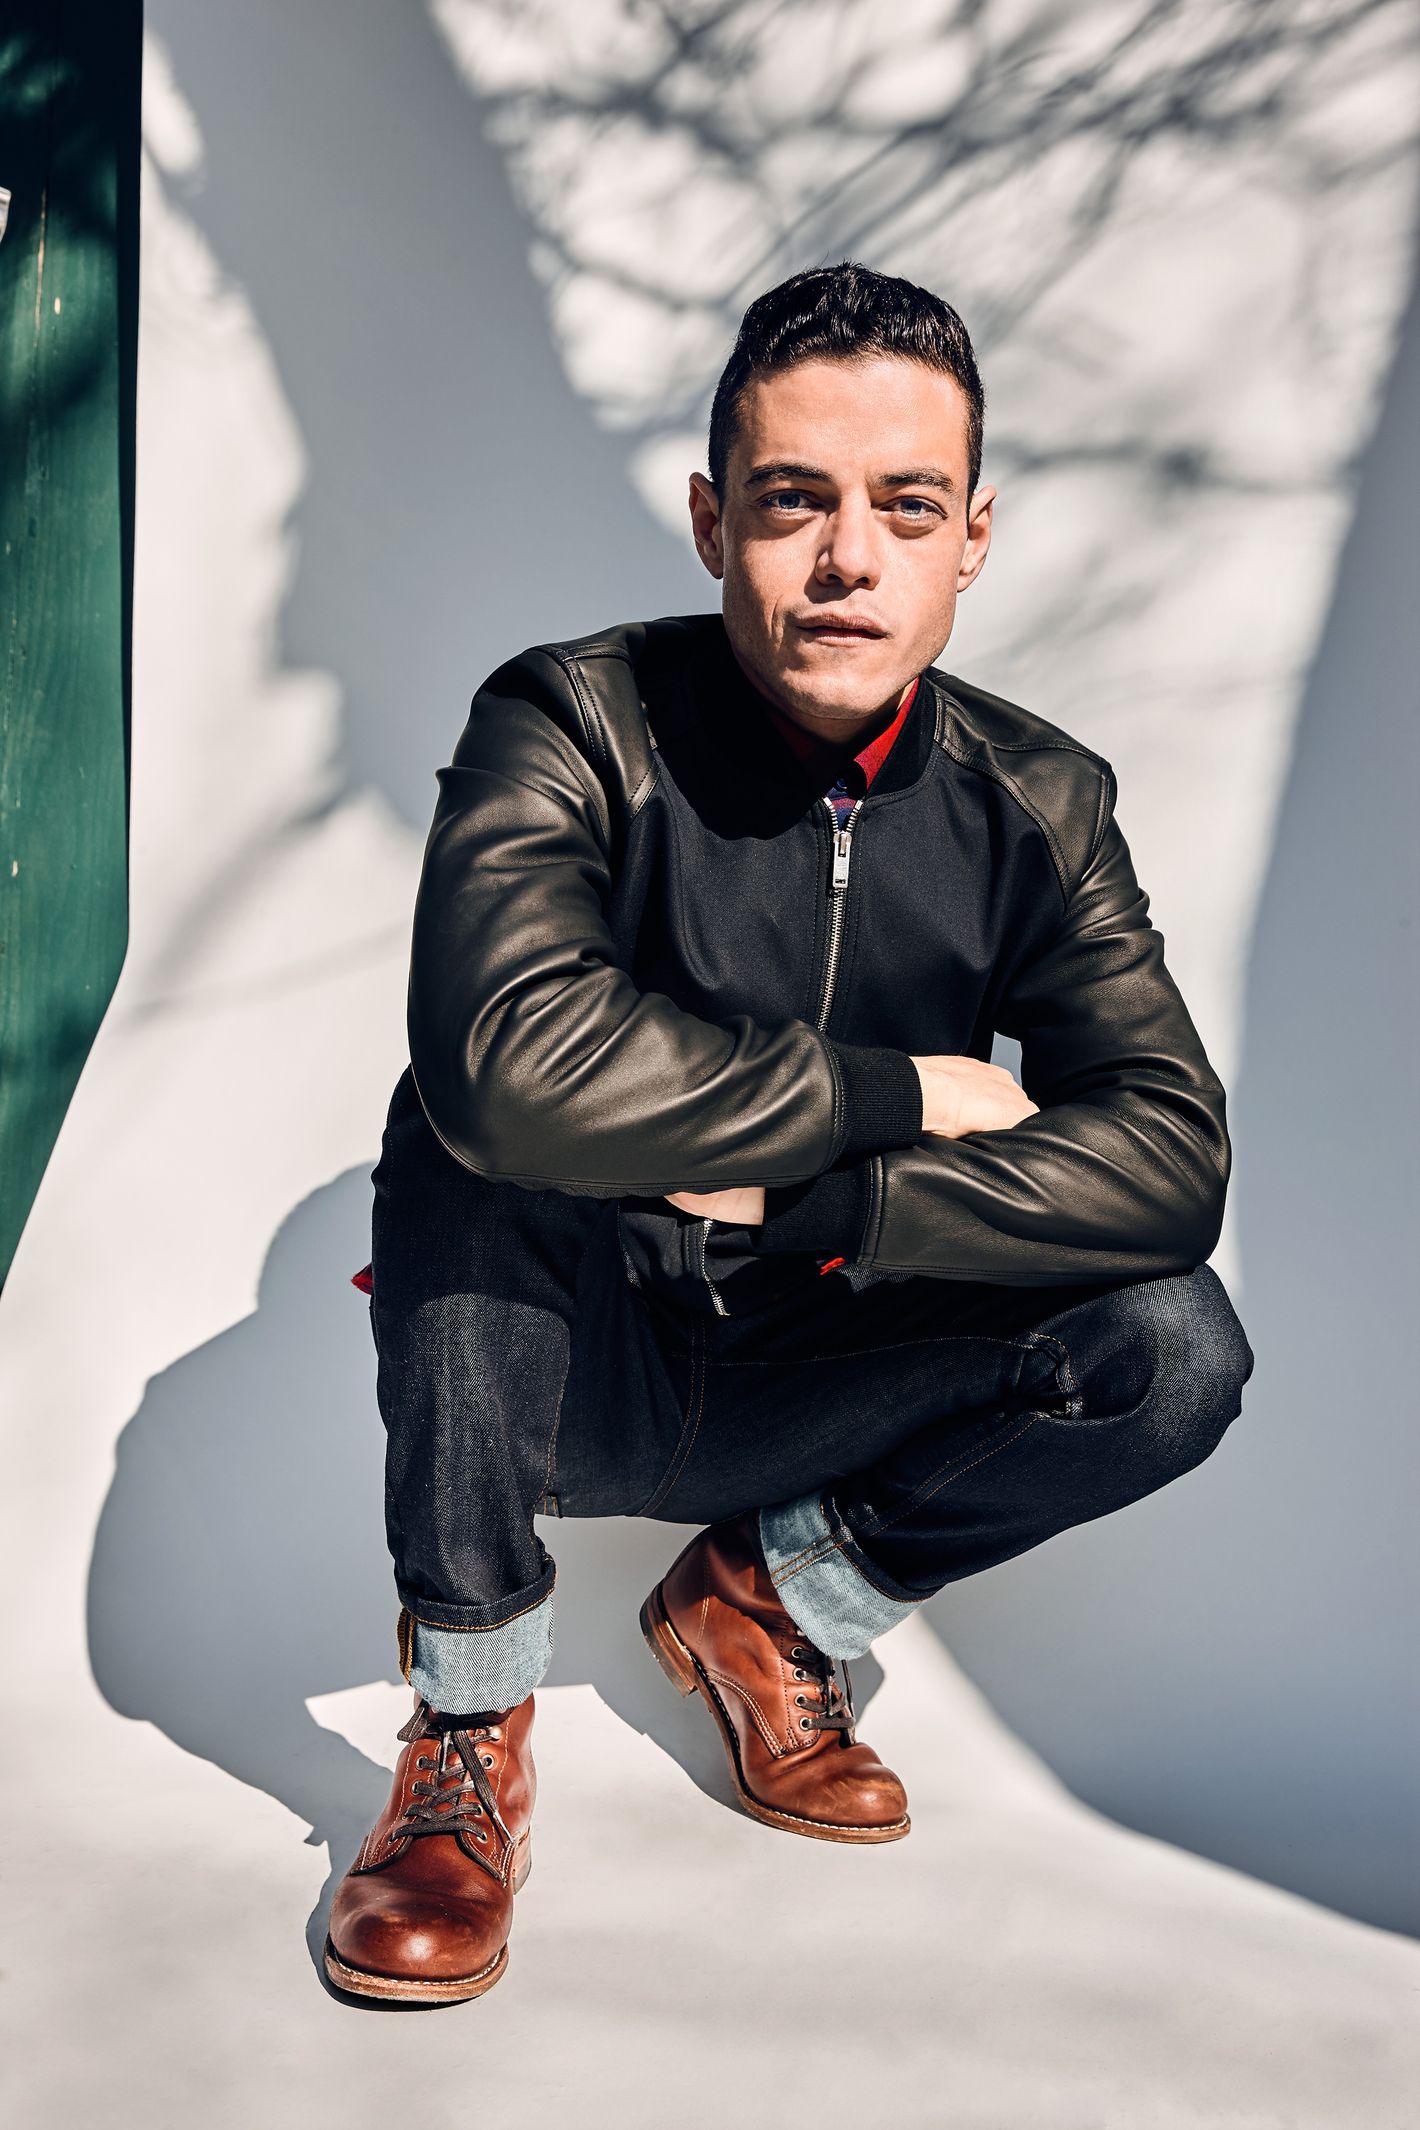 Mr. Robot Is Just the Beginning for Rami Malek.